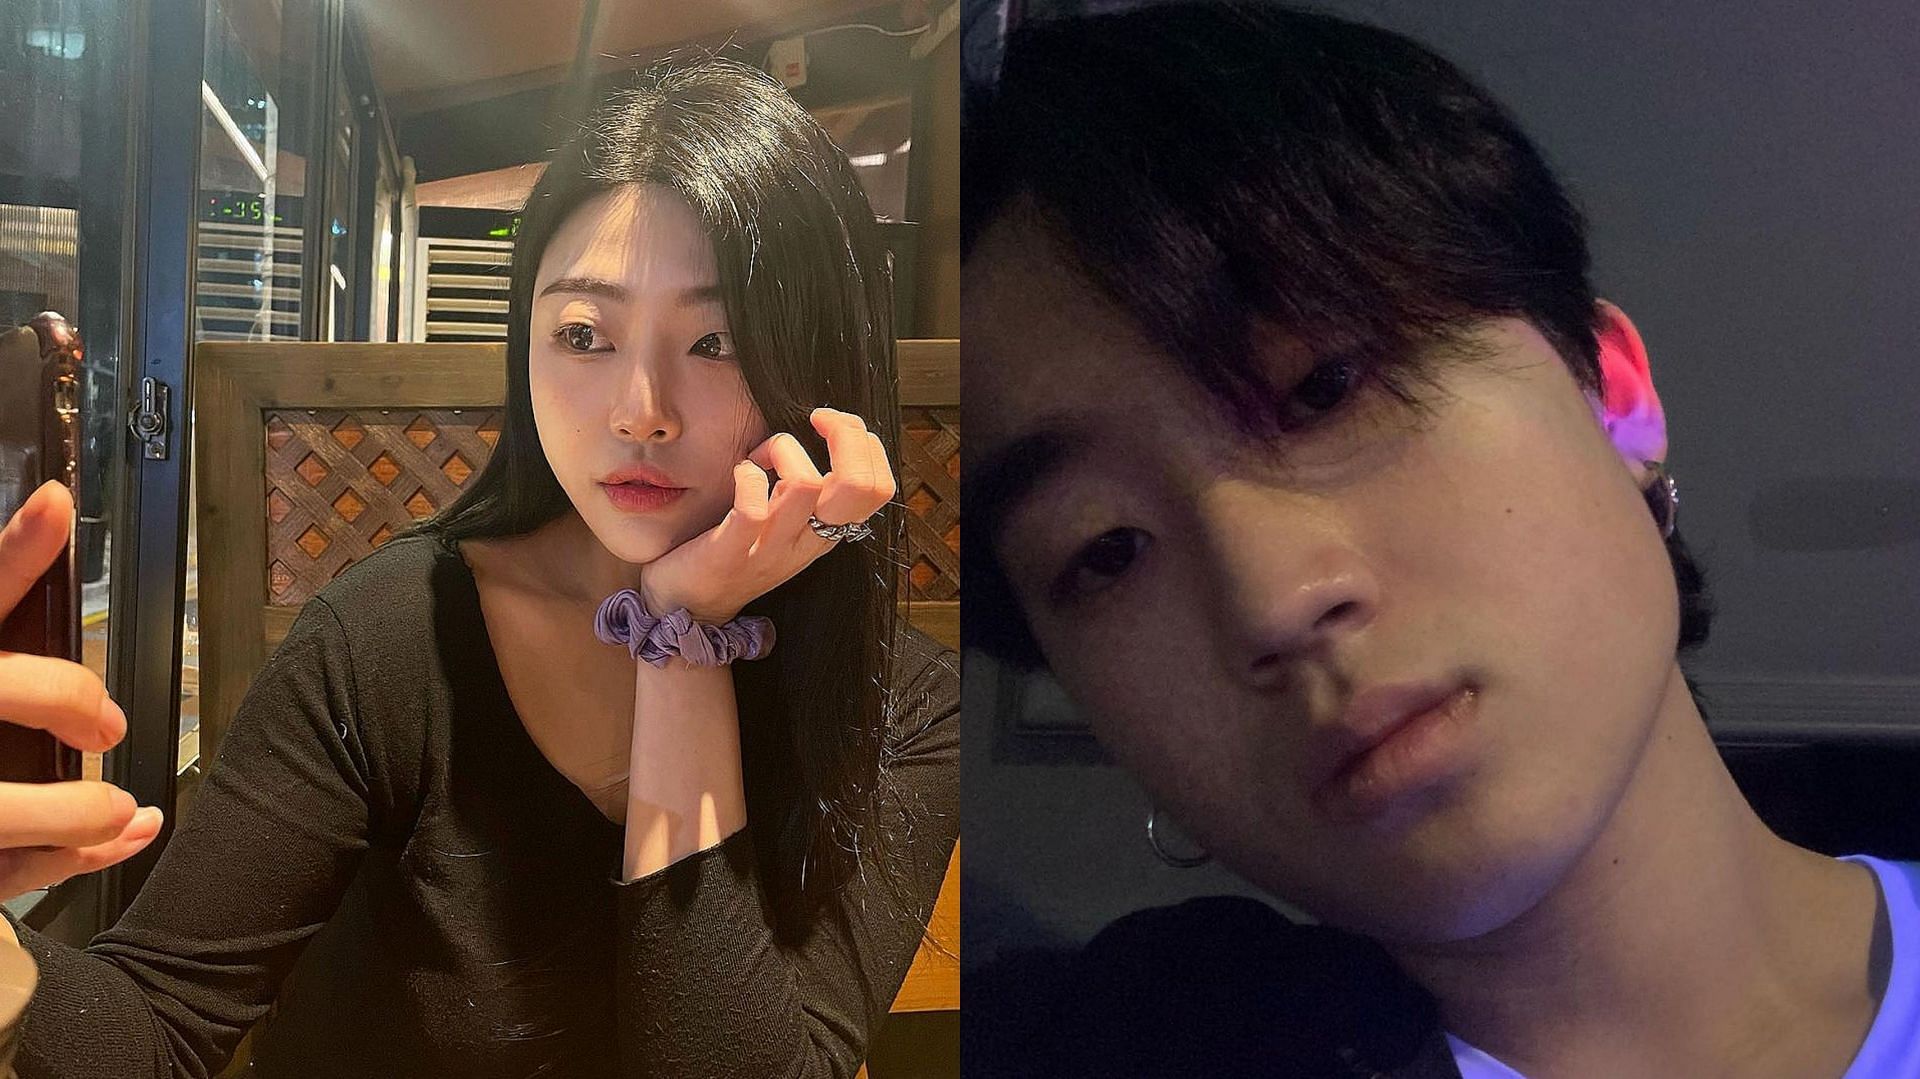 The duo&#039;s relationship rumor was fuelled by Lee Seungh Ah&#039;s Instagram stories. (Image via Instagram/@sophie_seungah and @dmofxxkinark)